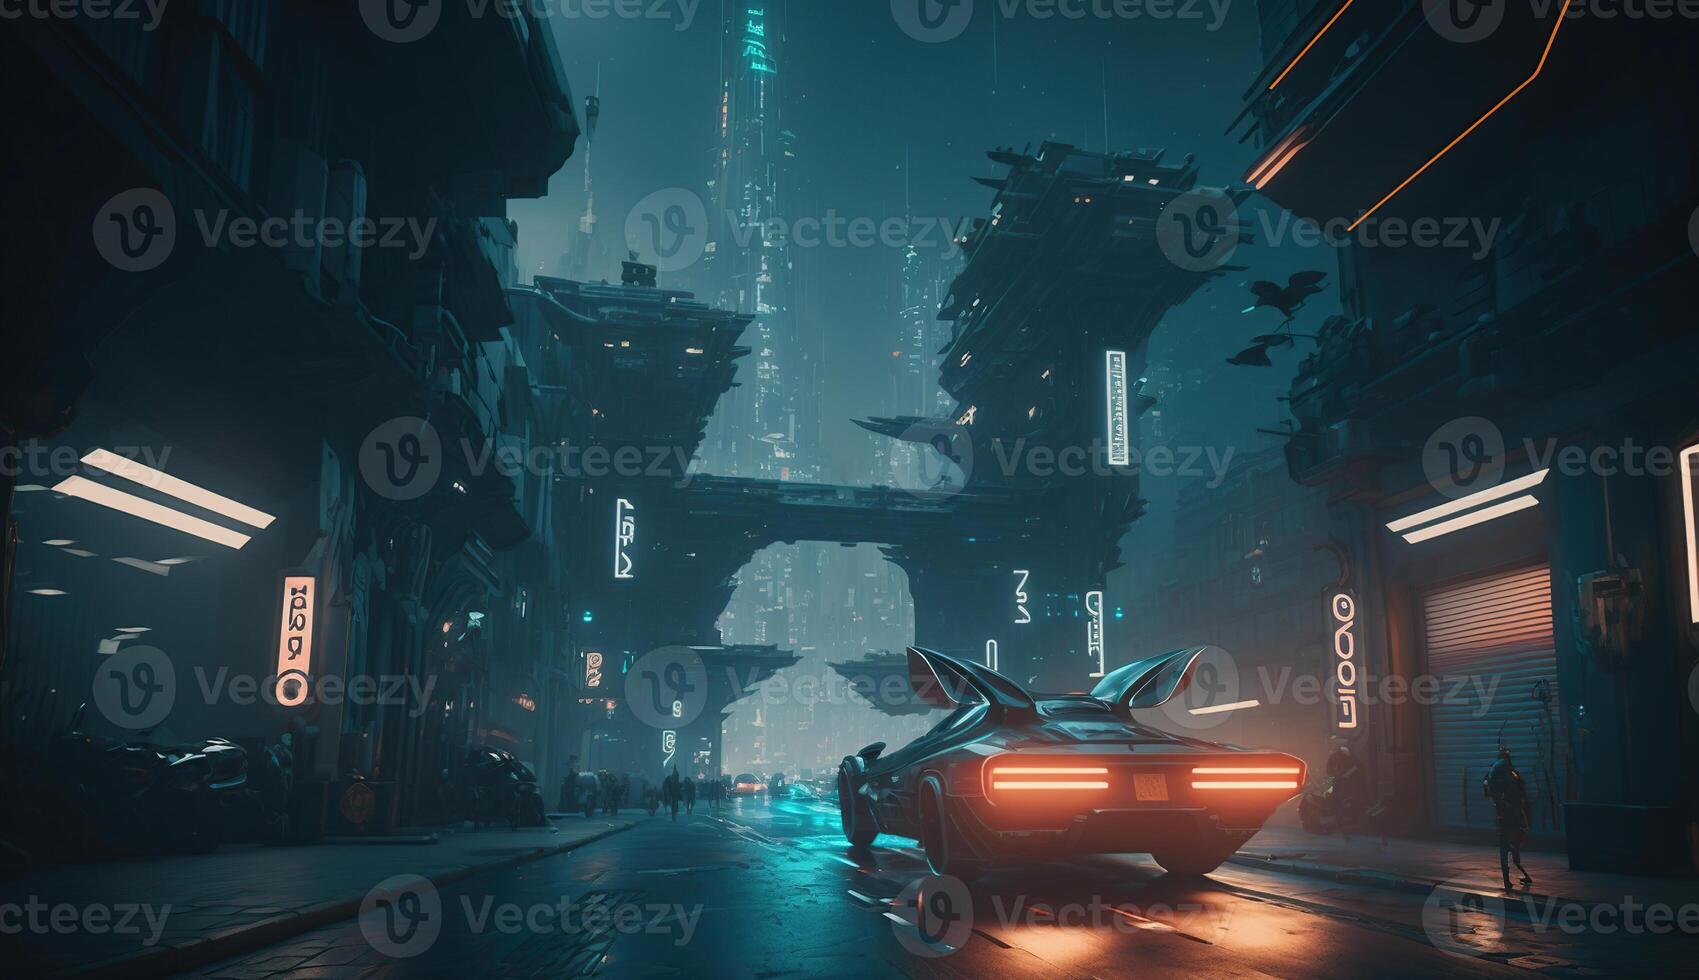 A futuristic city with flying cars, in the style of Blade Runner, photo